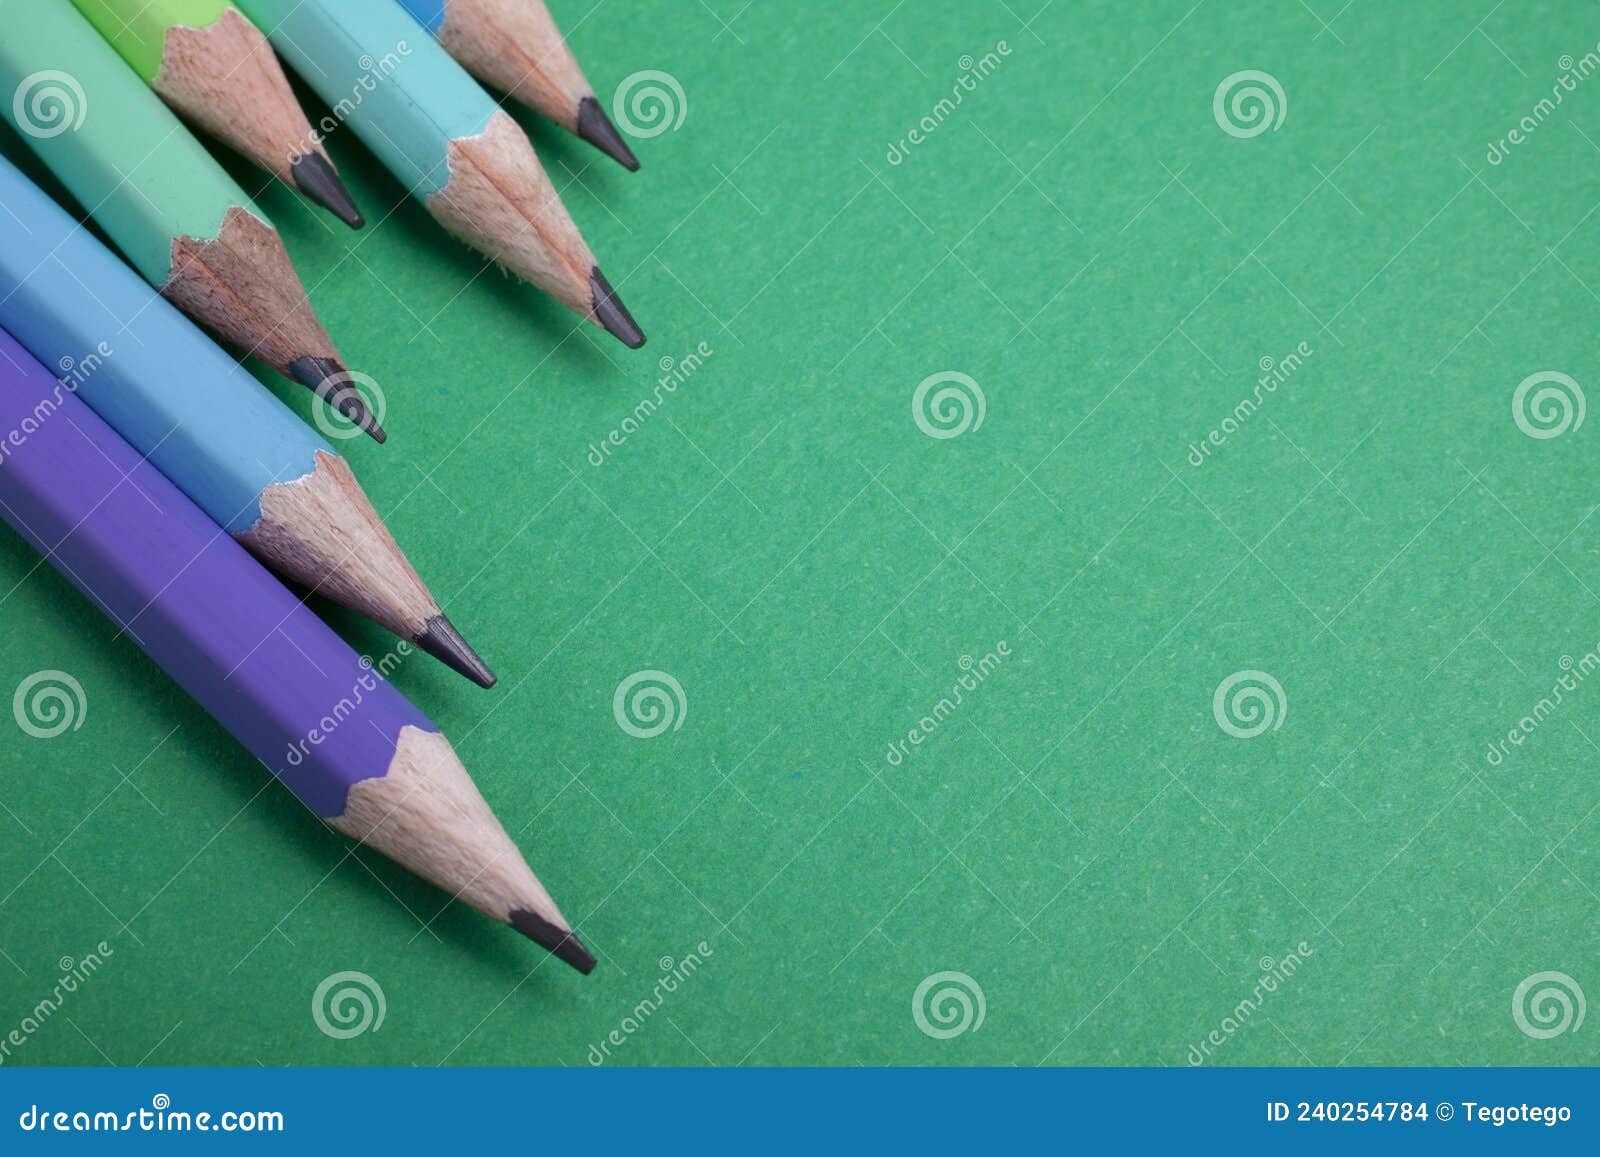 pencil placed on green paper background with copy space